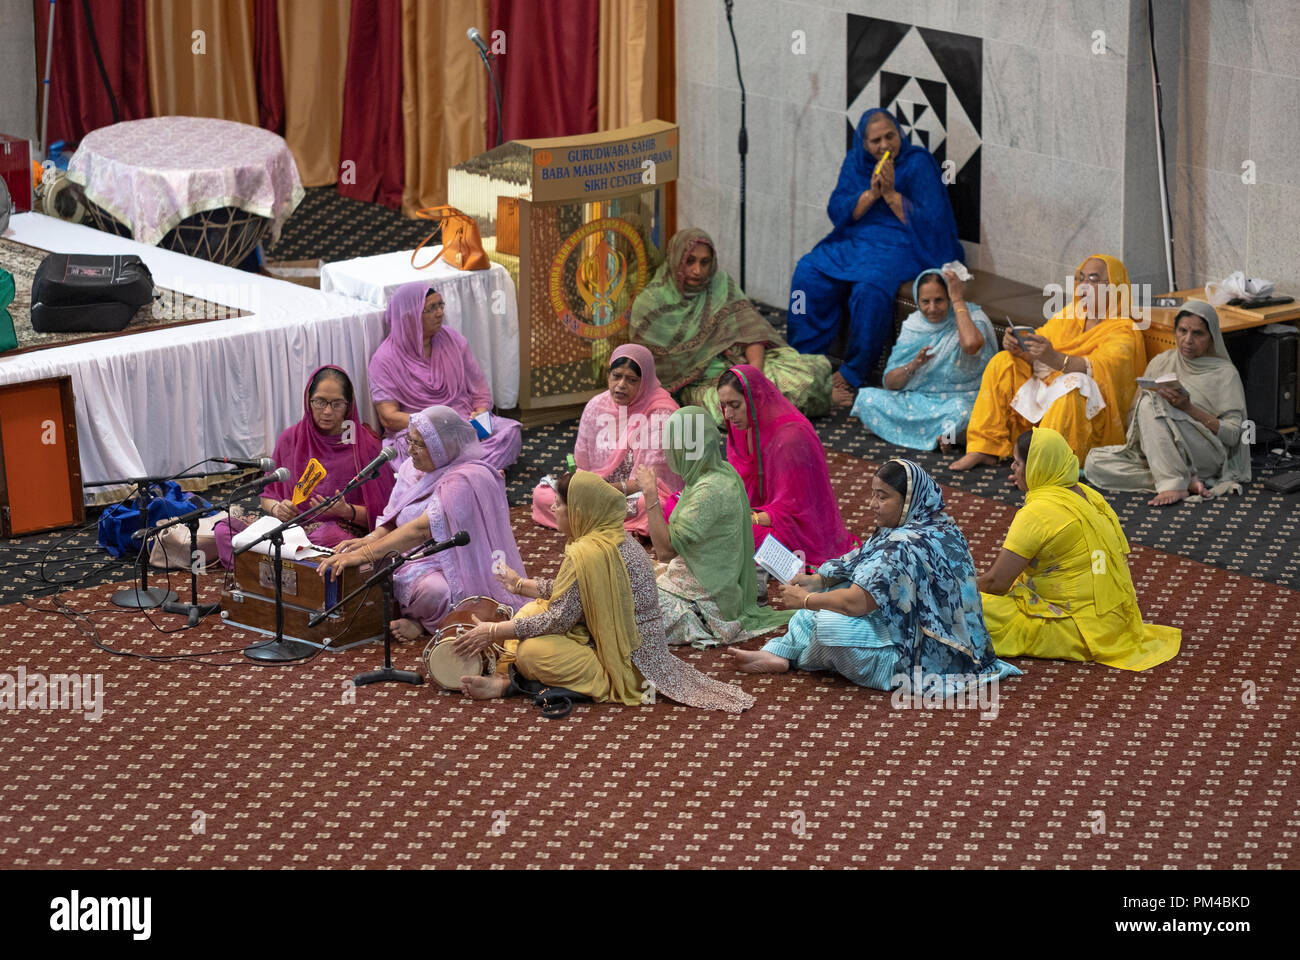 A group of women praying, meditating and playing music at Baba Makhan Shah Lobana temple in Queens, New York. Stock Photo